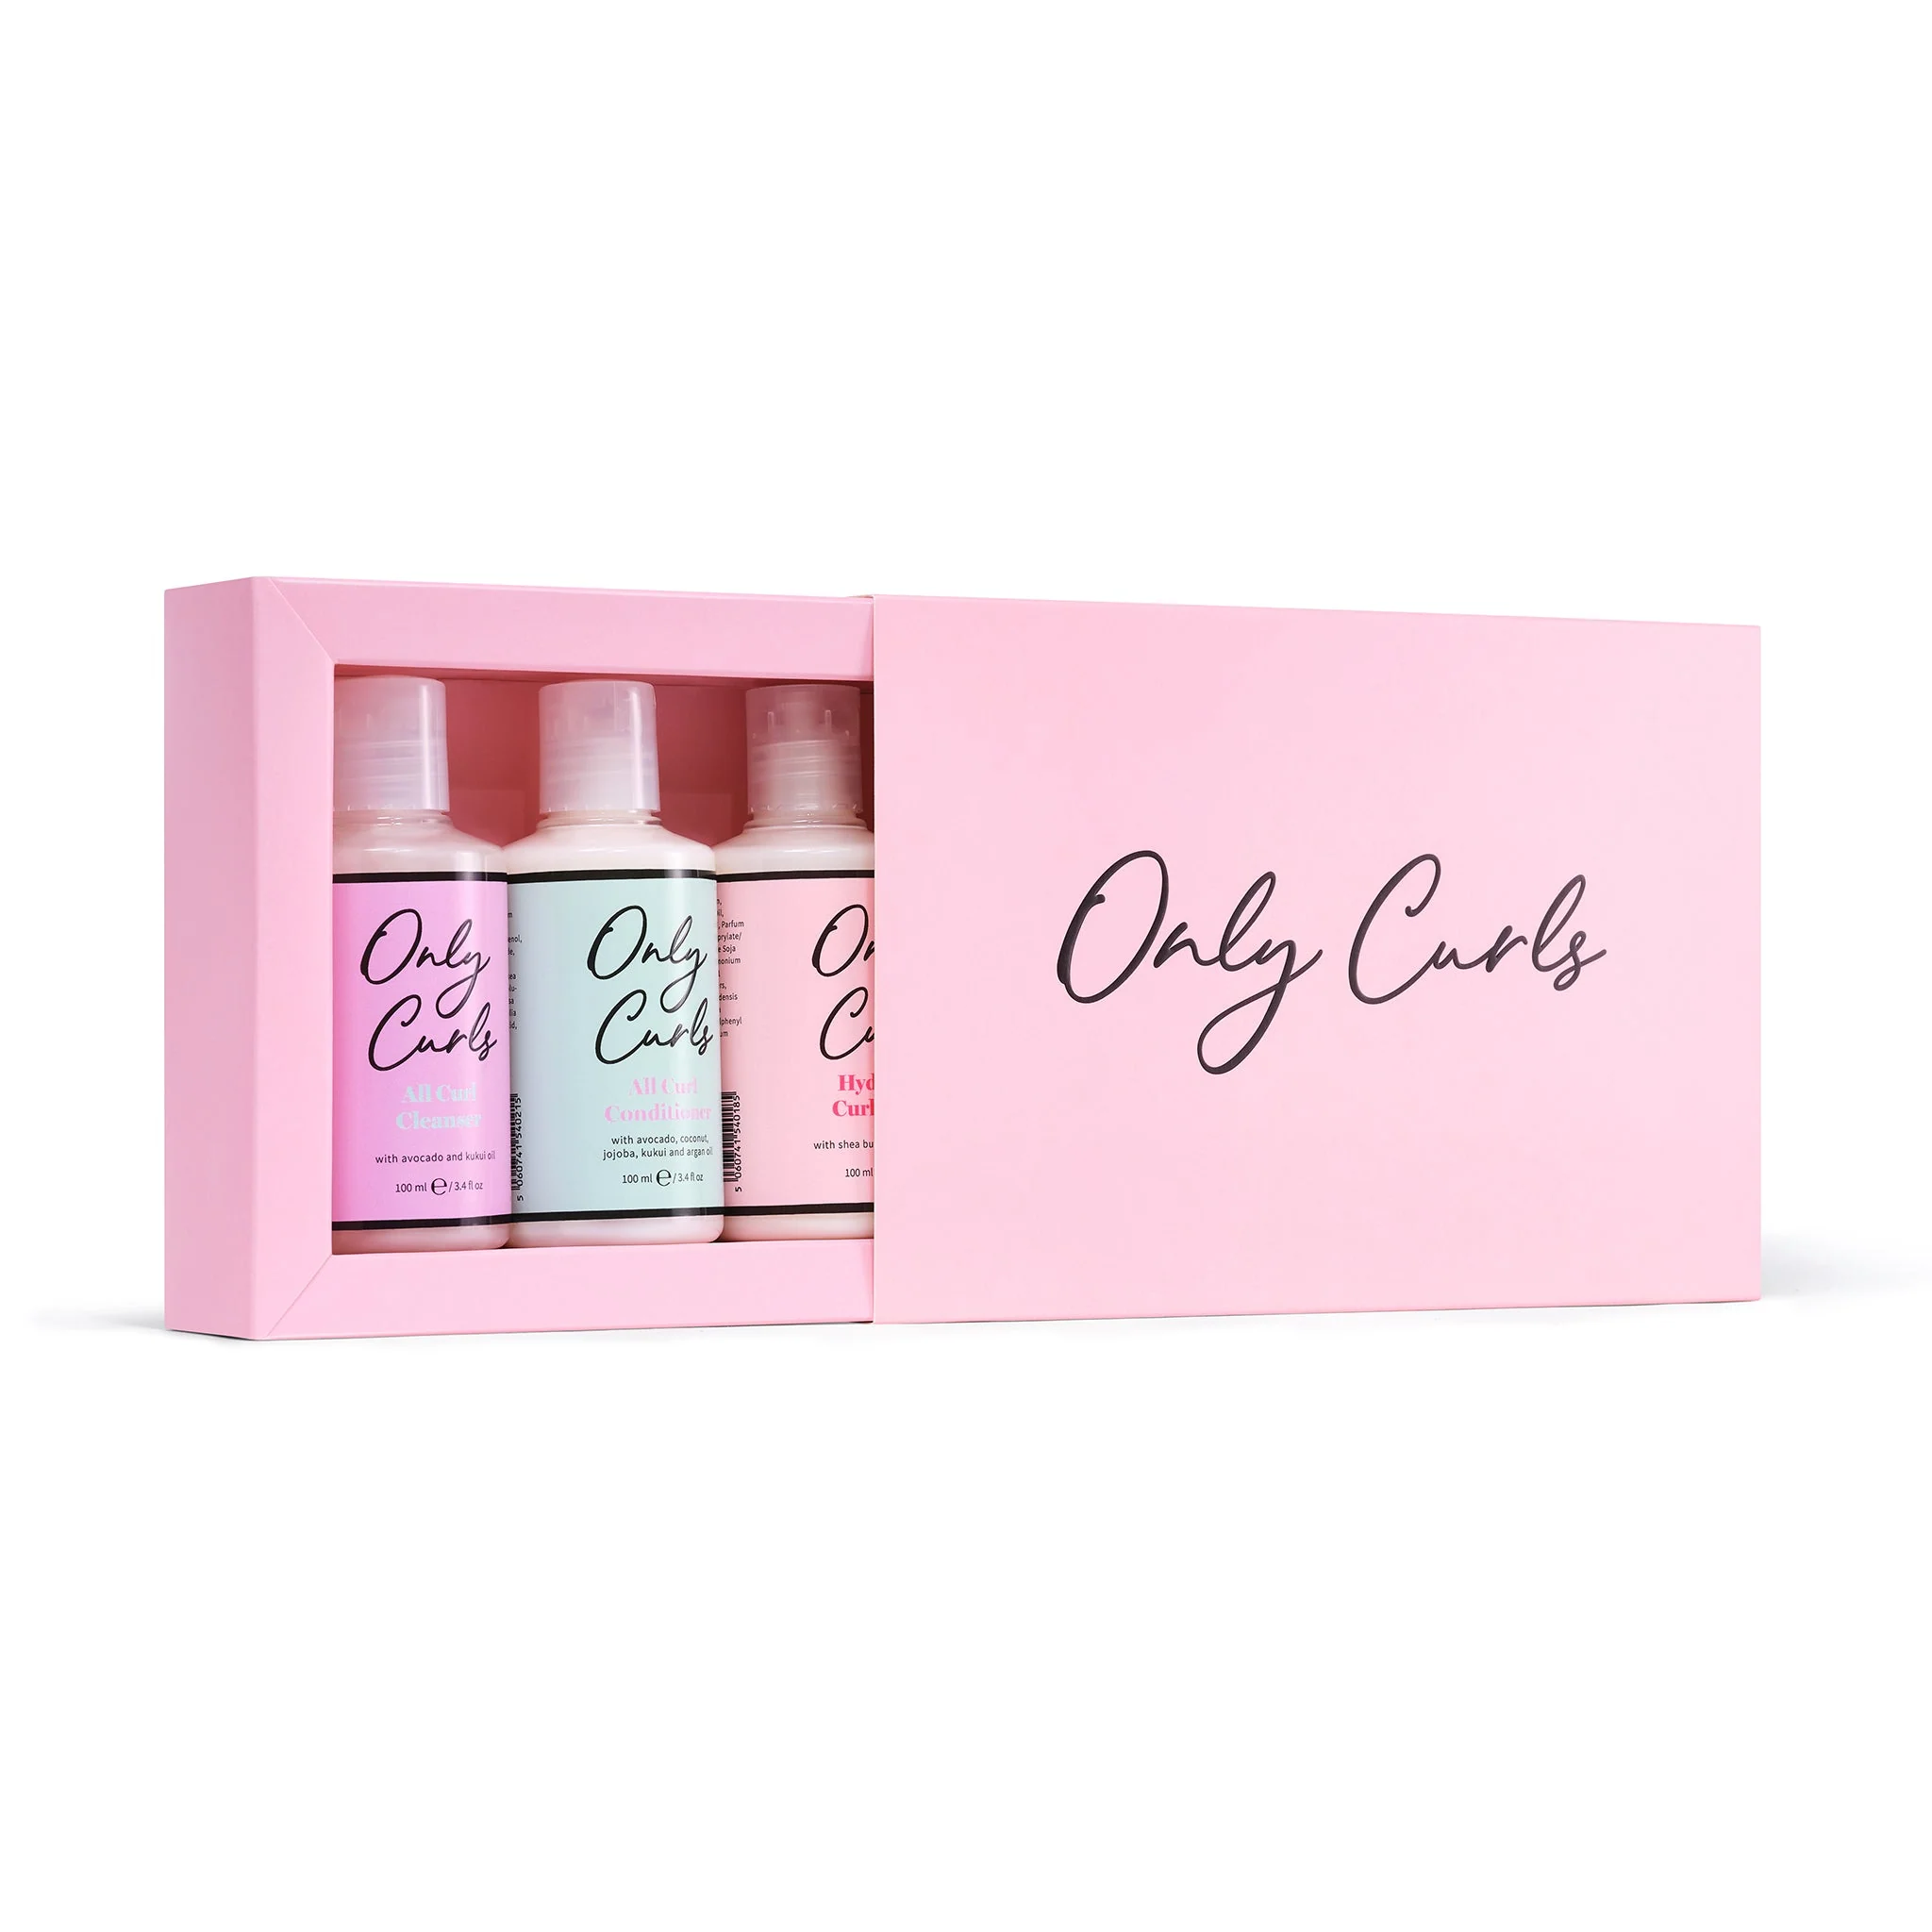 Only Curls Mini Travel Collection, 4 x 100 ml